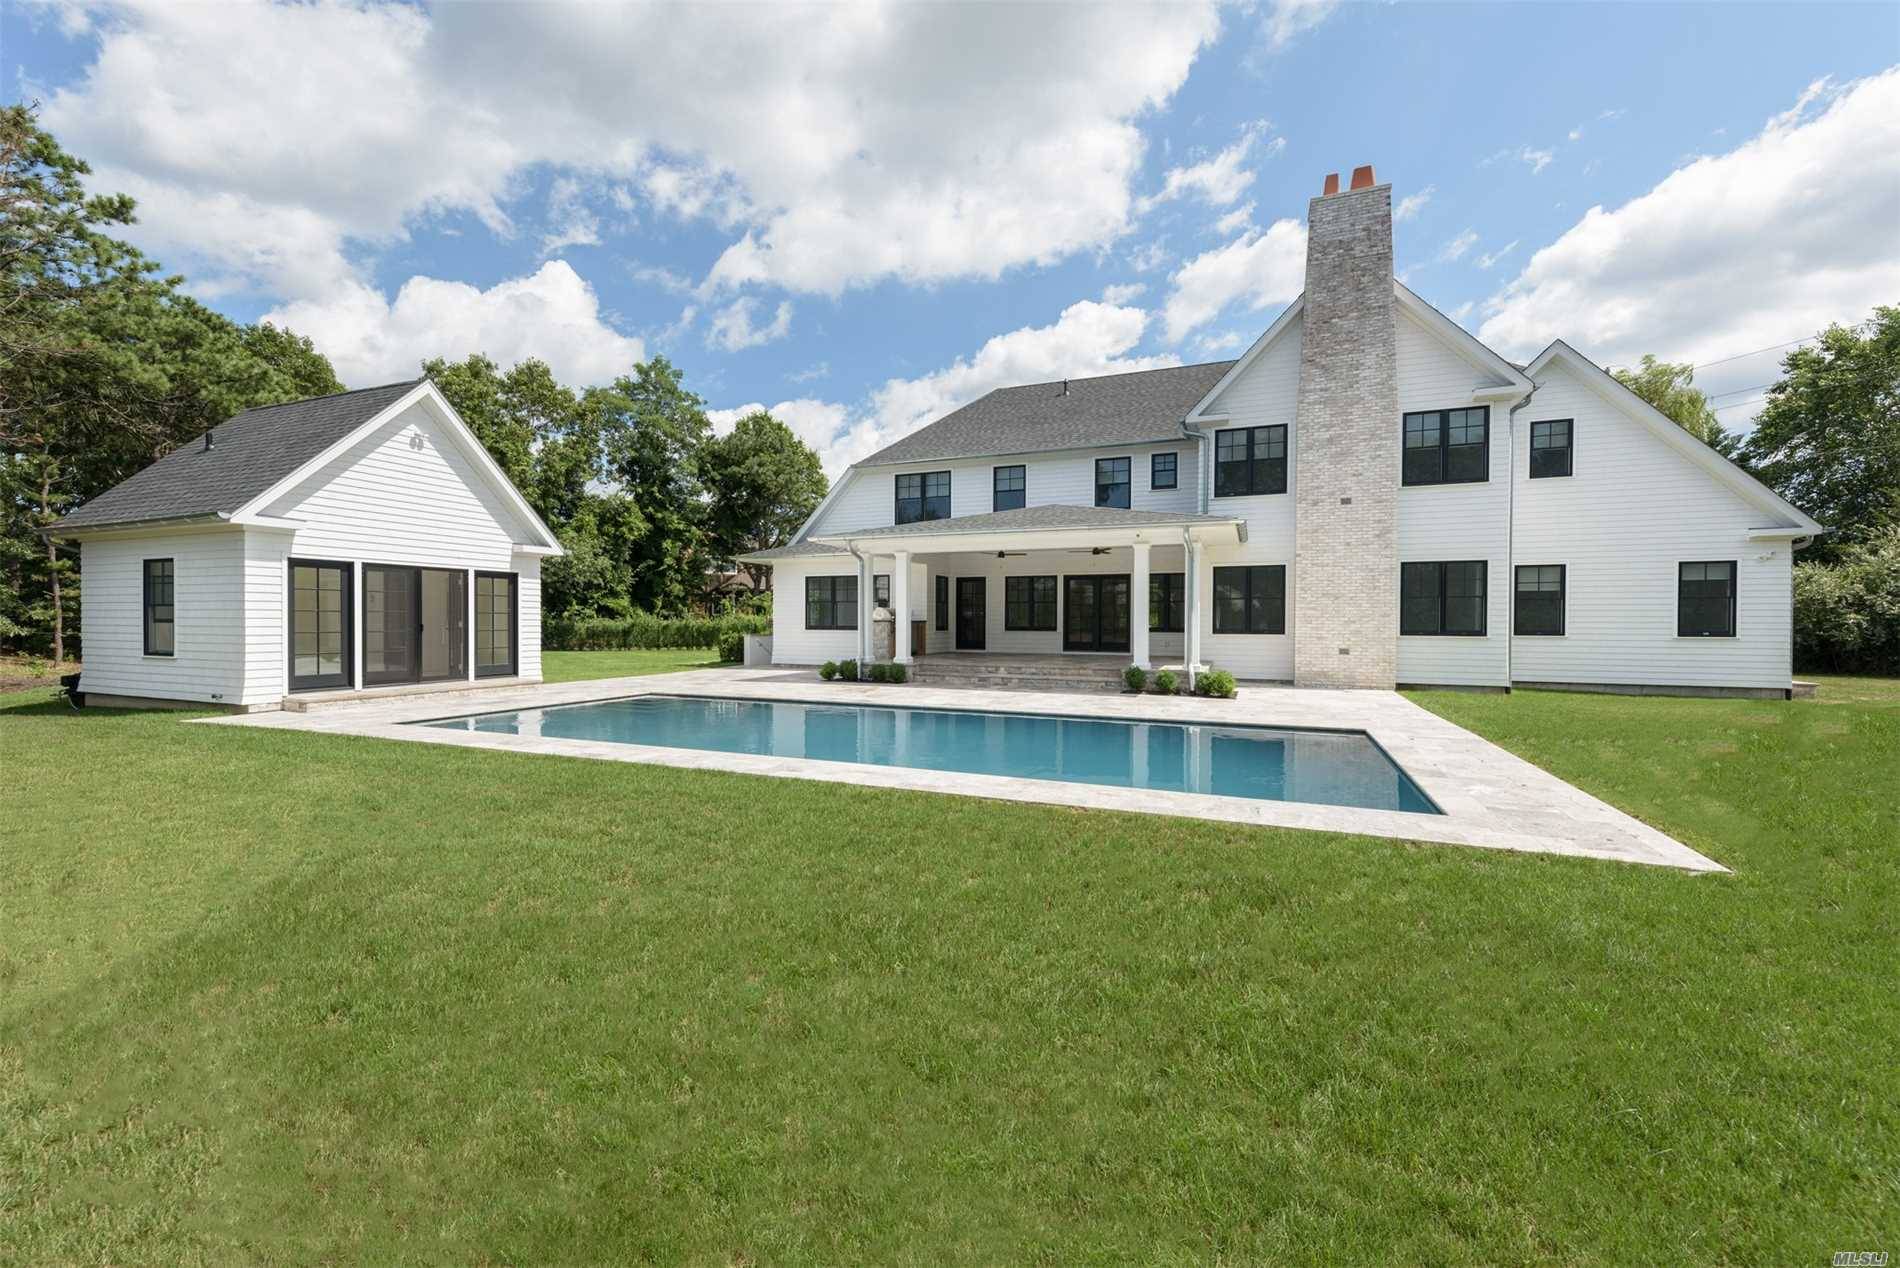 Luxurious New Construction In Desirable Quogue Village With High End, Perfectionist Craftsmanship Throughout.